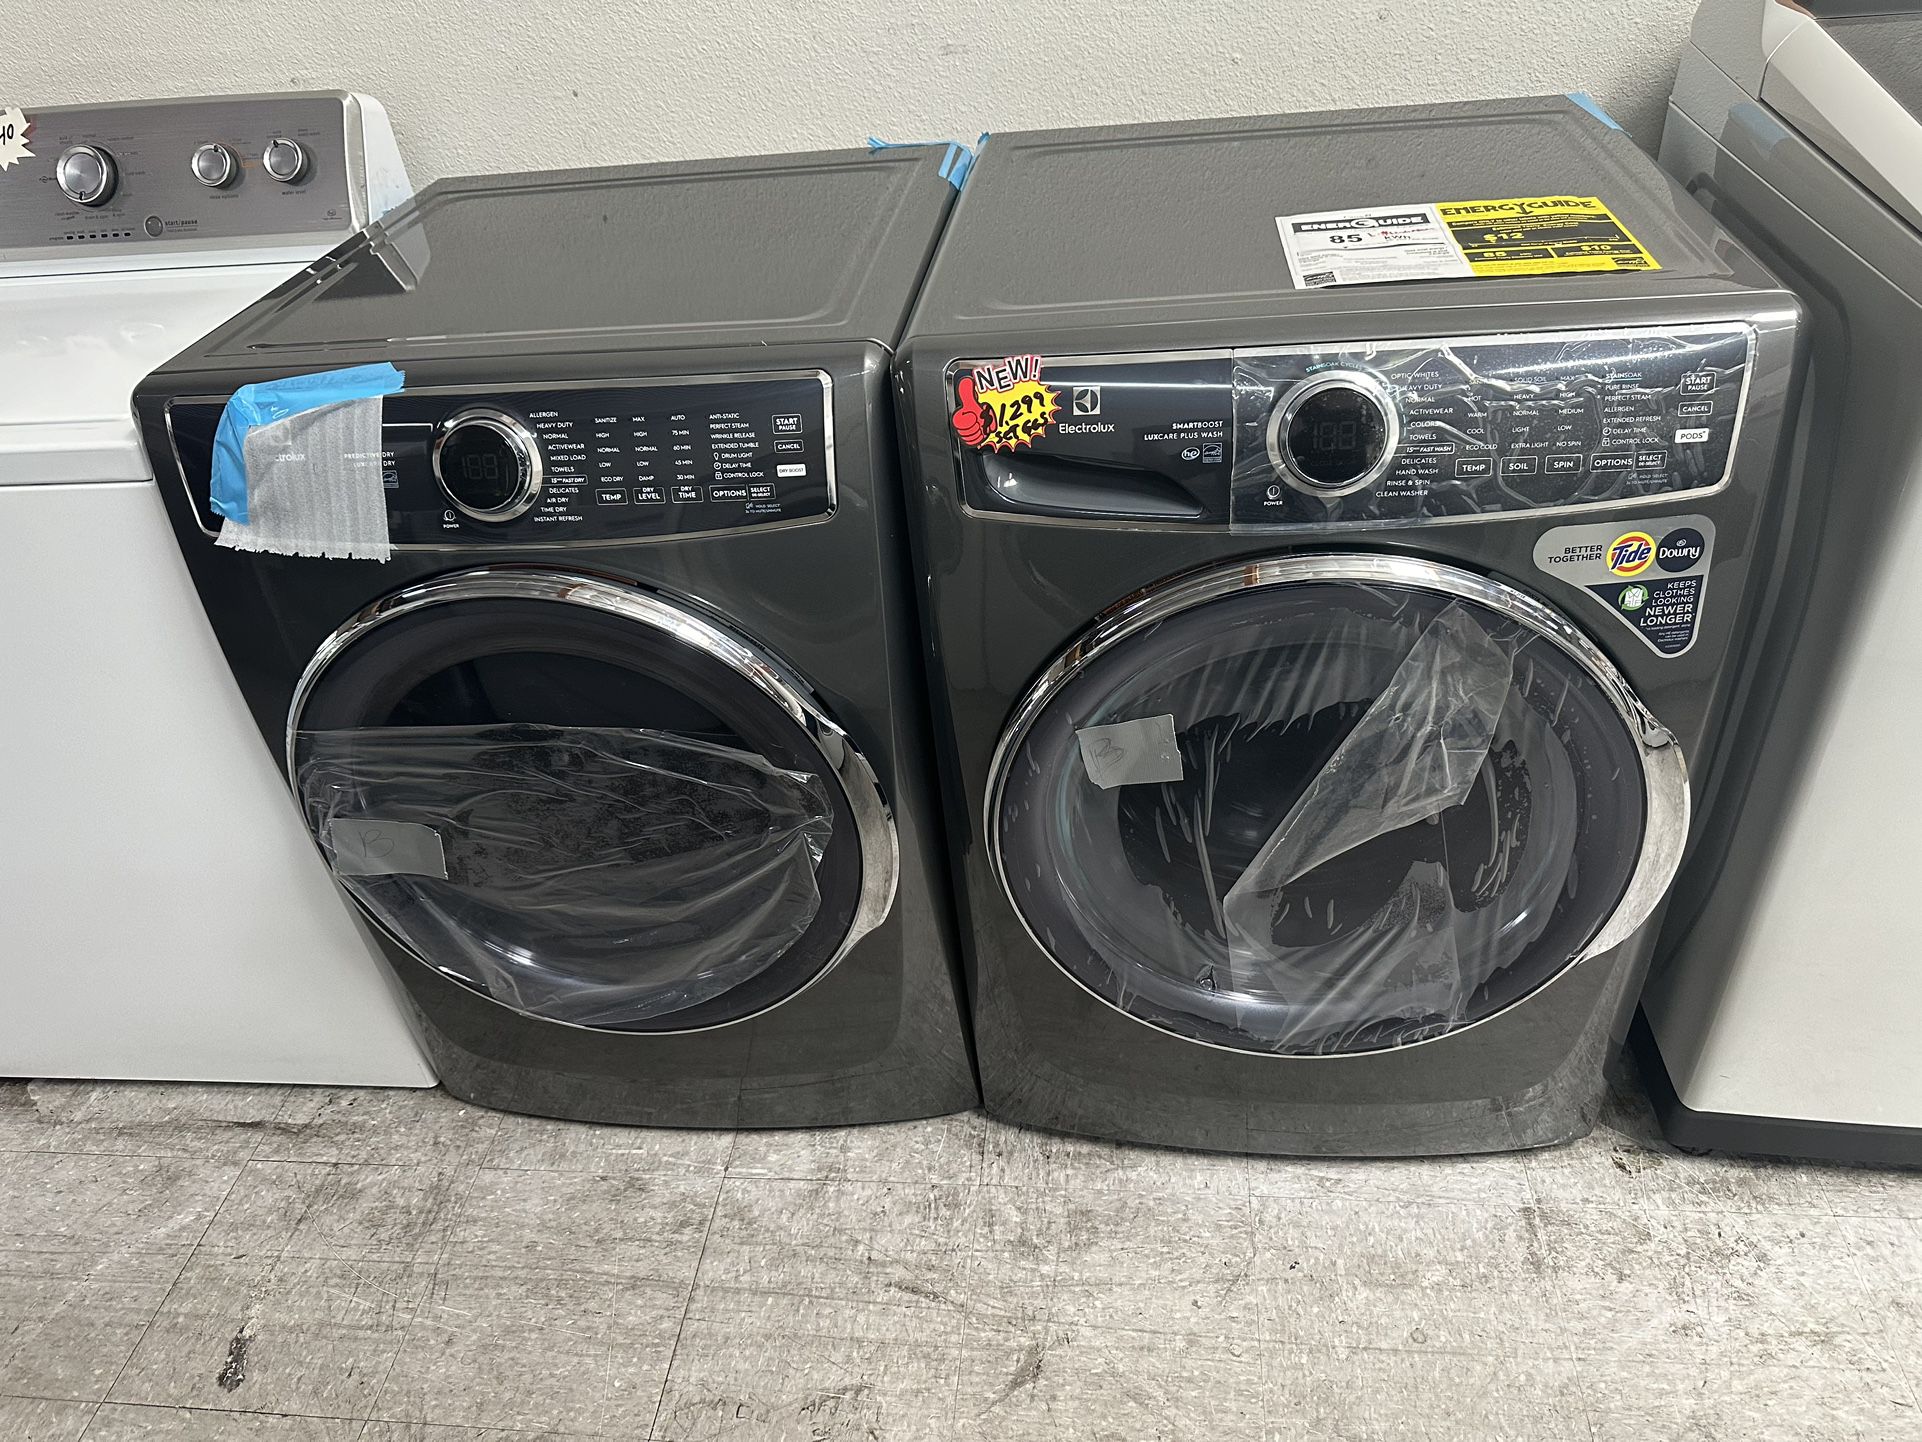 ELECTROLUX FRONT LOAD WASHER AND GAS DRYER SET 